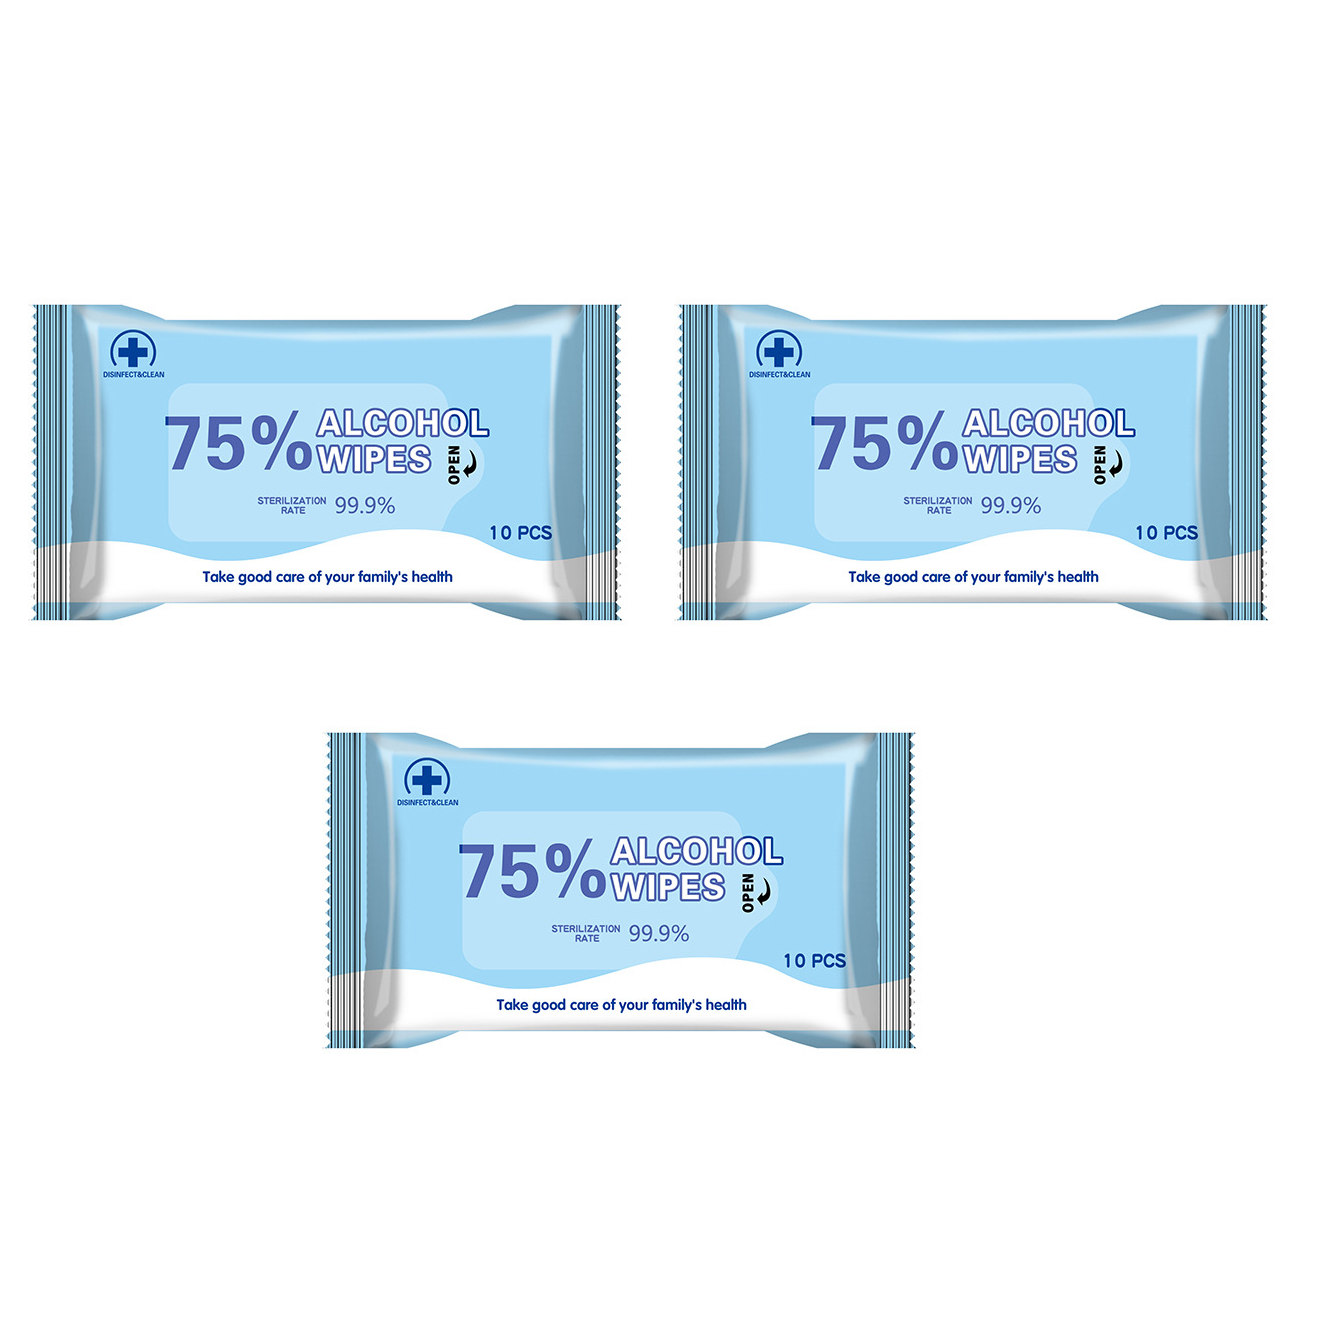 XINQING-3-Packs-Of-10Pcs-75-Medical-Alcohol-Wipes-999-Antibacterial-Disinfection-Cleaning-Wet-Wipes--1651914-1